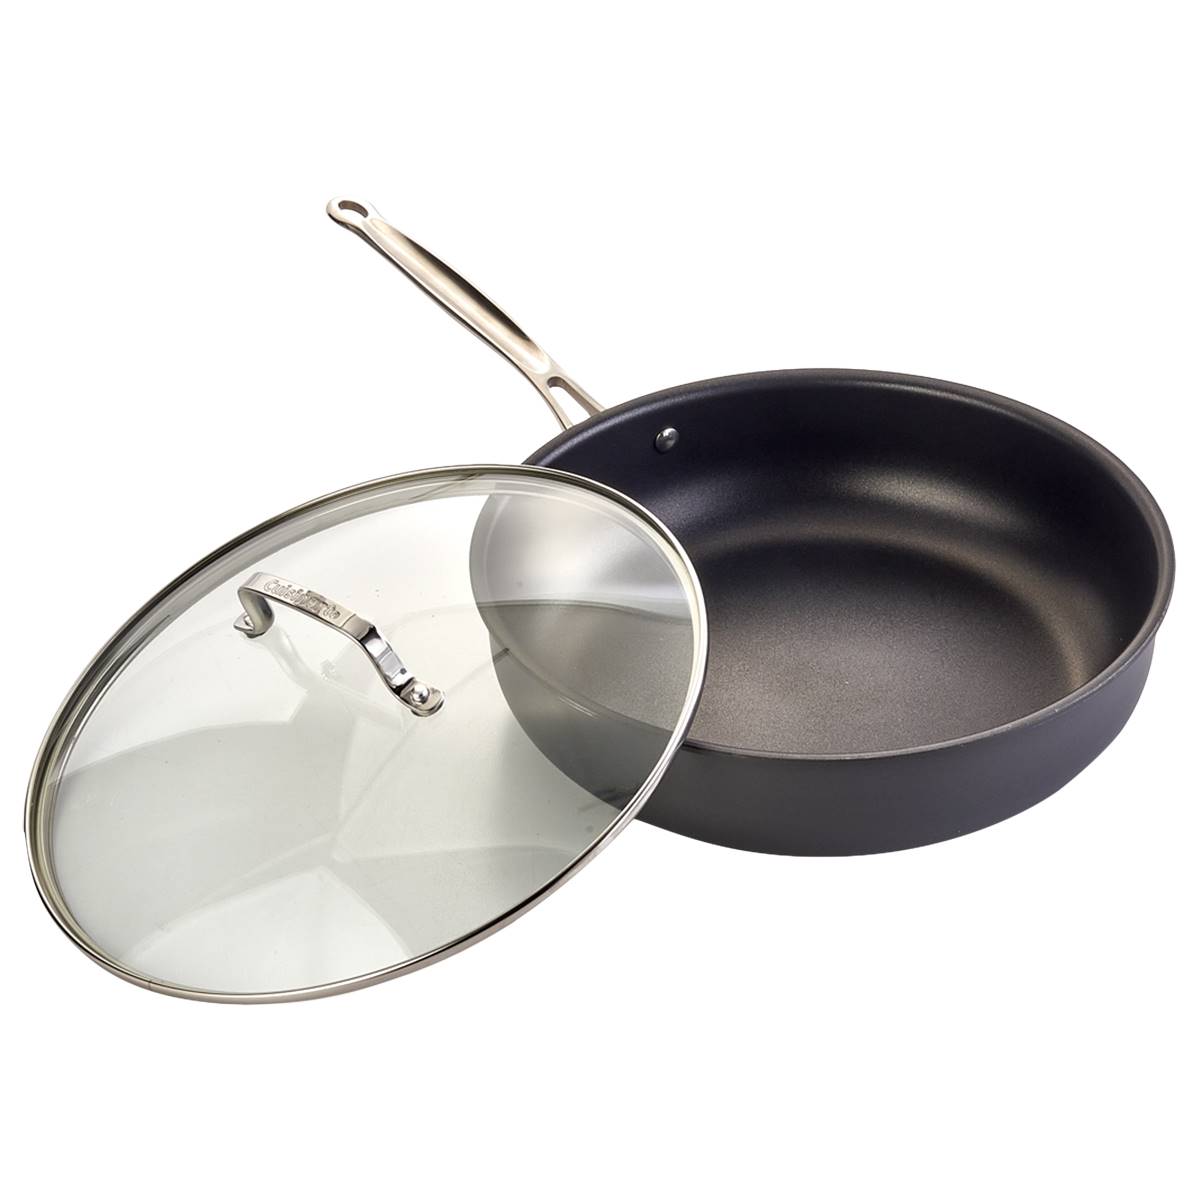 Cuisinart(R) Cuis Contour Hard Anodized 12in. Fry Pan